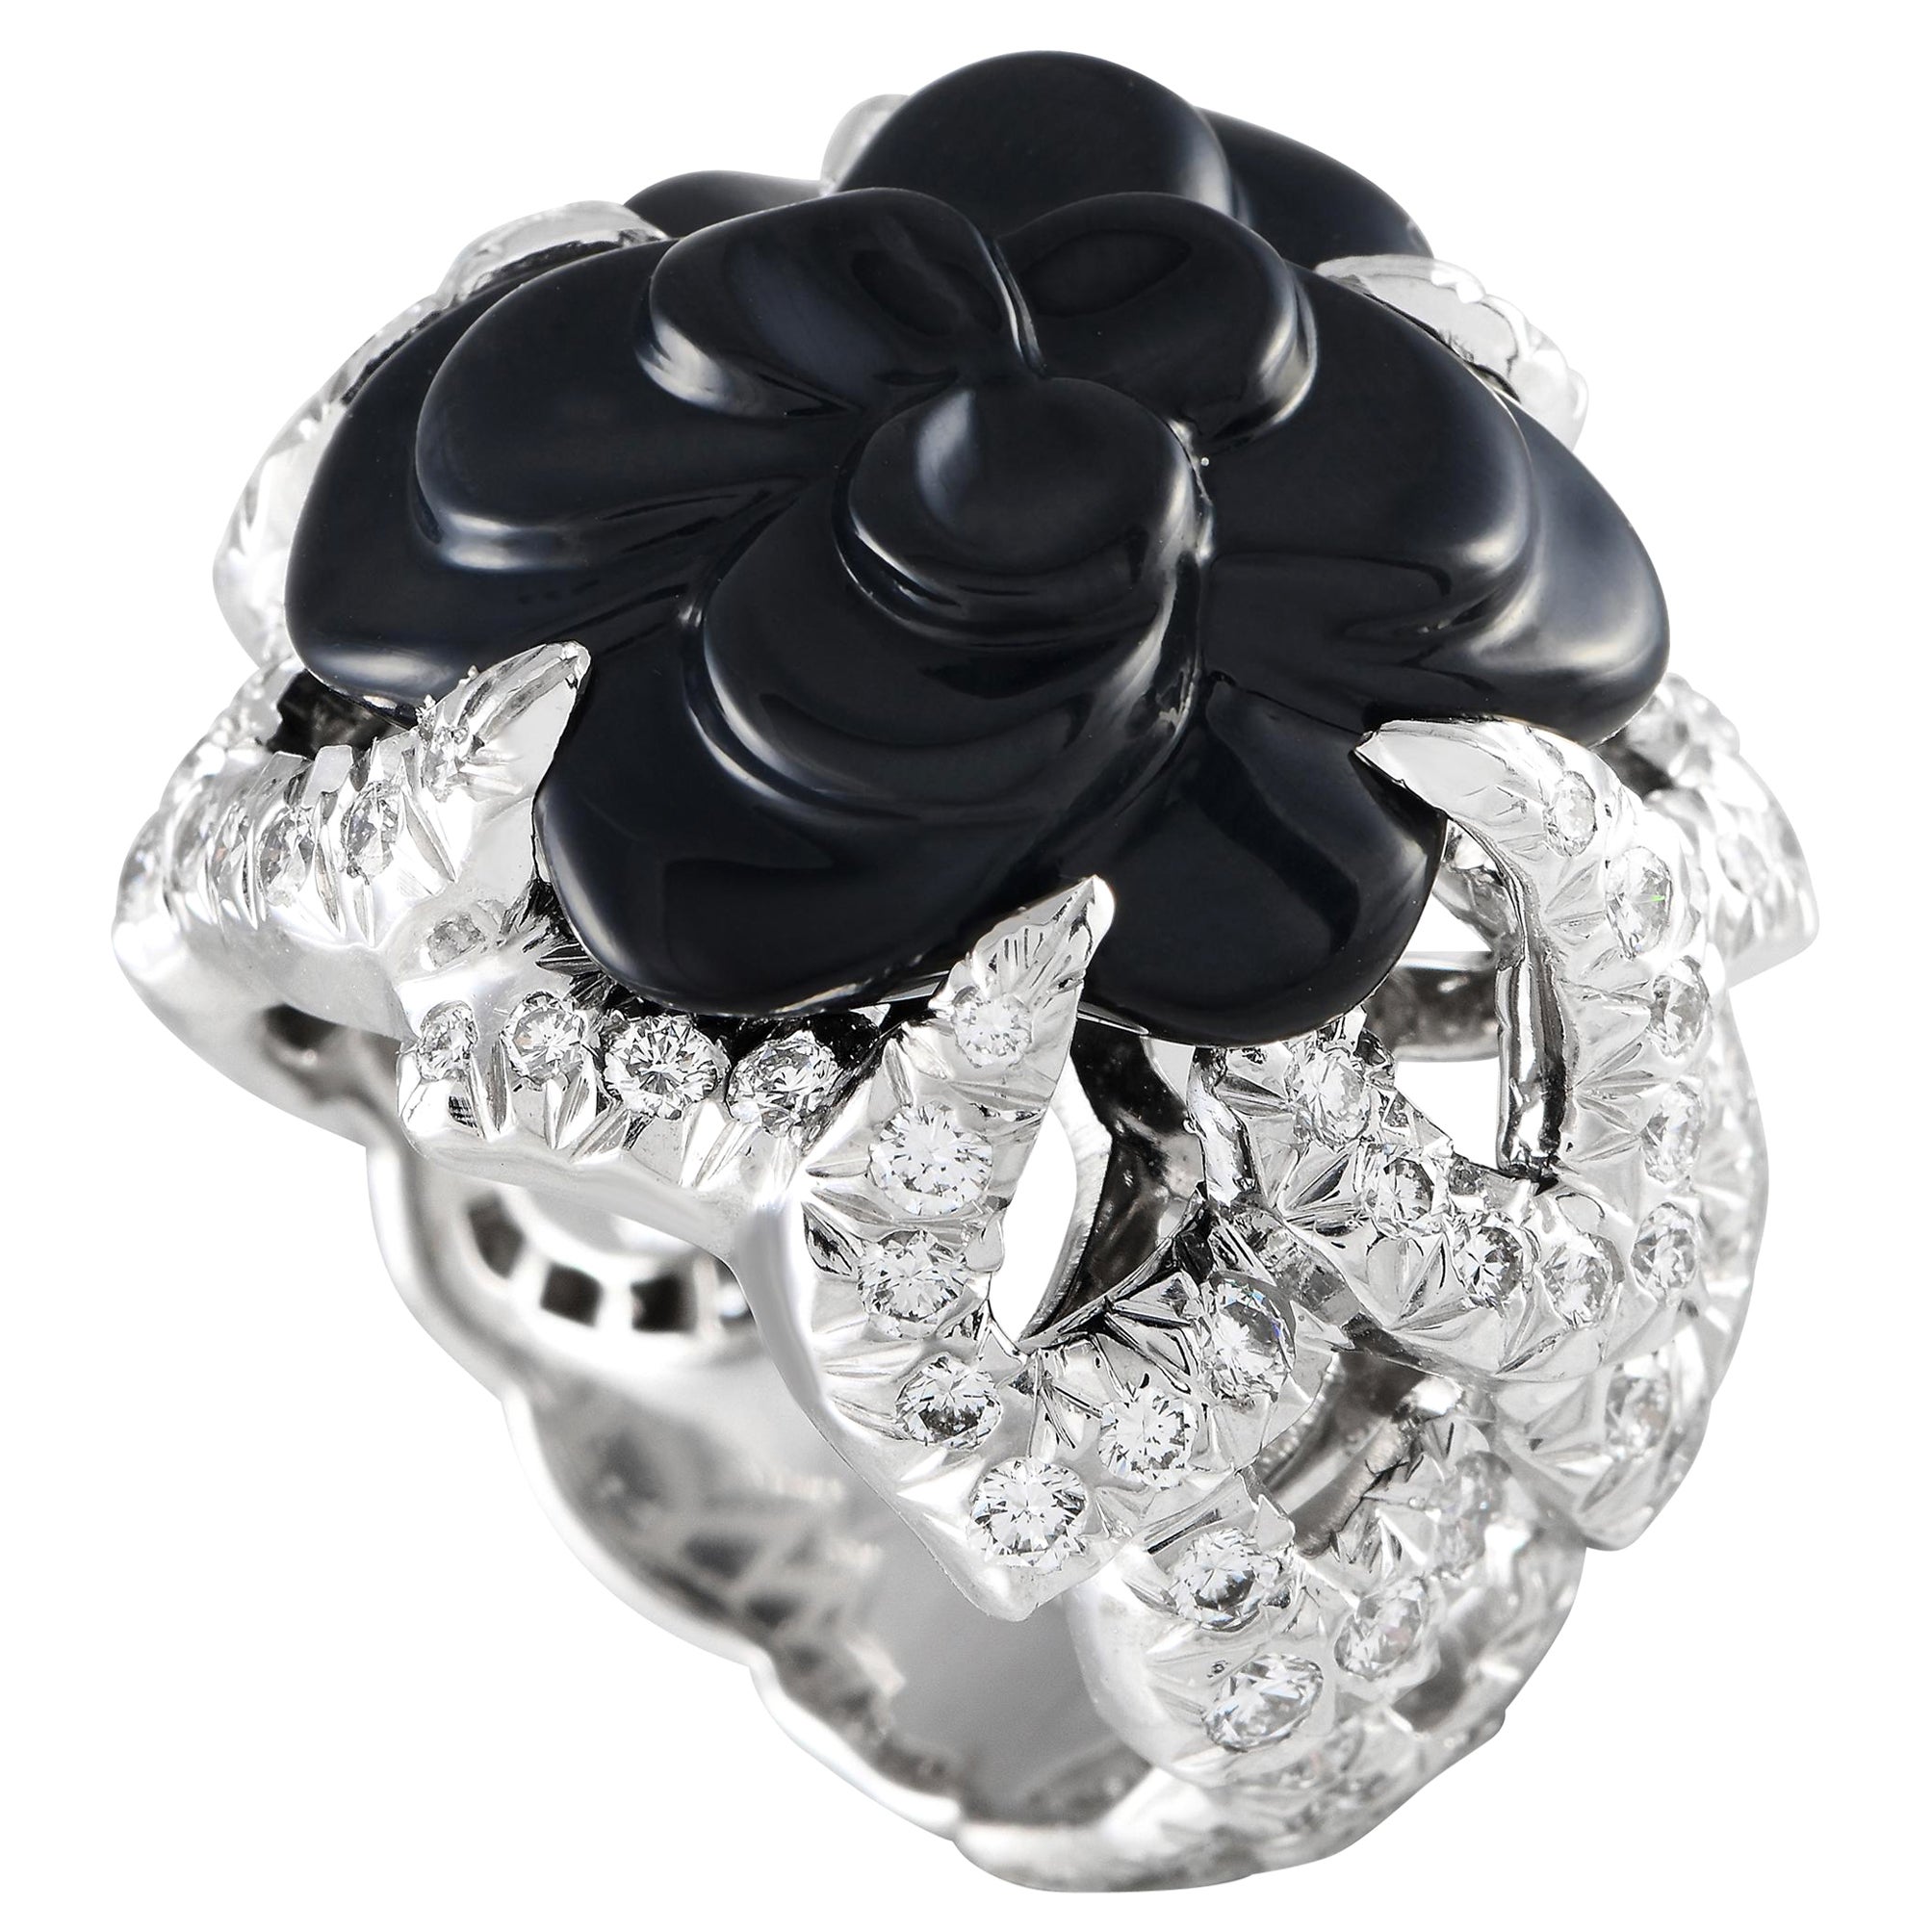 Chanel Camlia 18K White Gold 2.50ct Diamond and Onyx Cocktail Ring For Sale